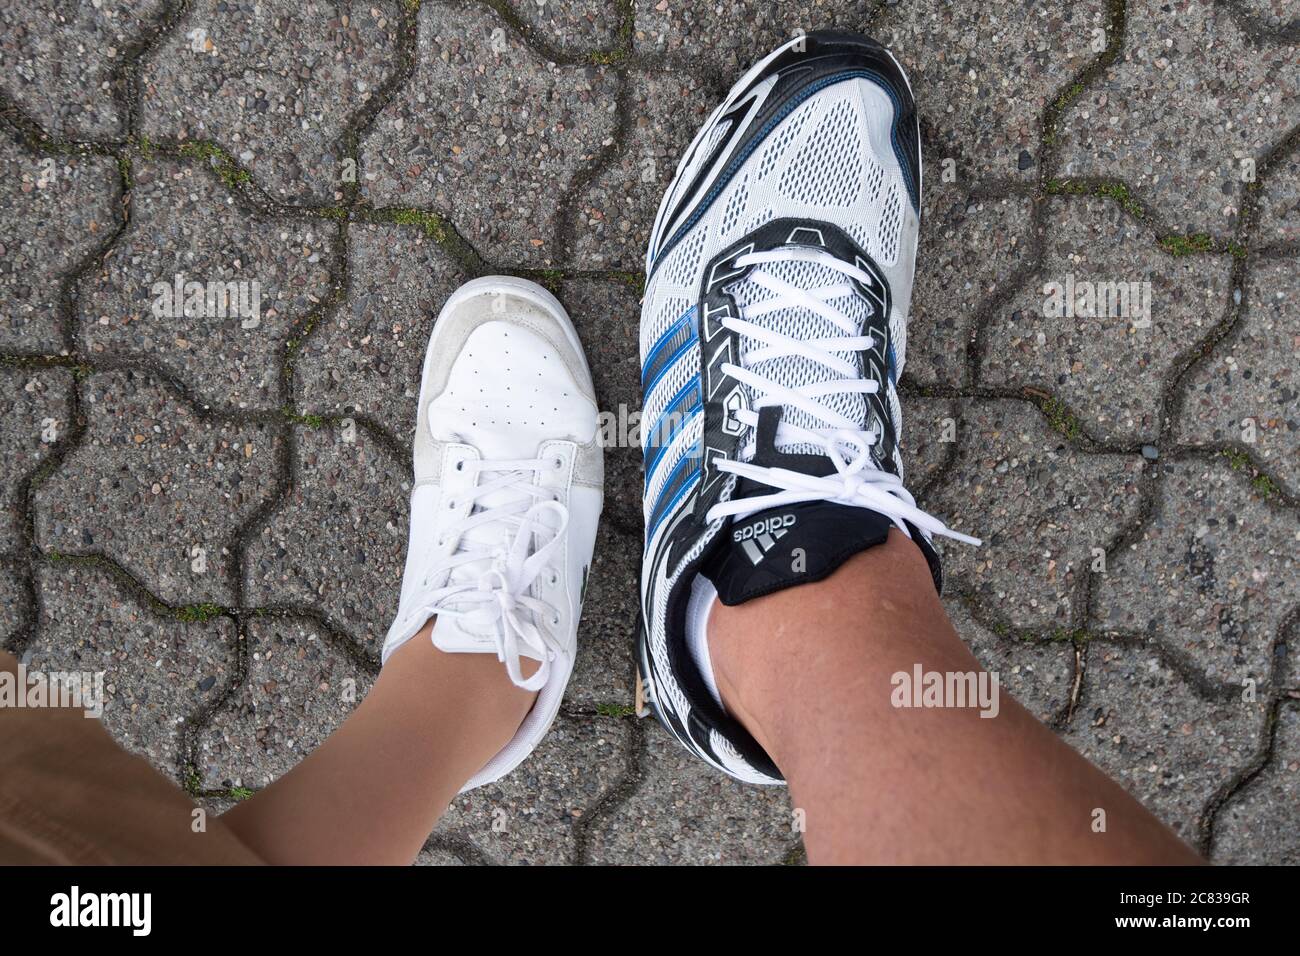 Hanover, Germany. 20th July, 2020. A woman with shoe size 38 stands next to  Jannik Könecke with shoe size 55. Jannik Könecke is 2.24 metres tall and  one of the tallest Germans.